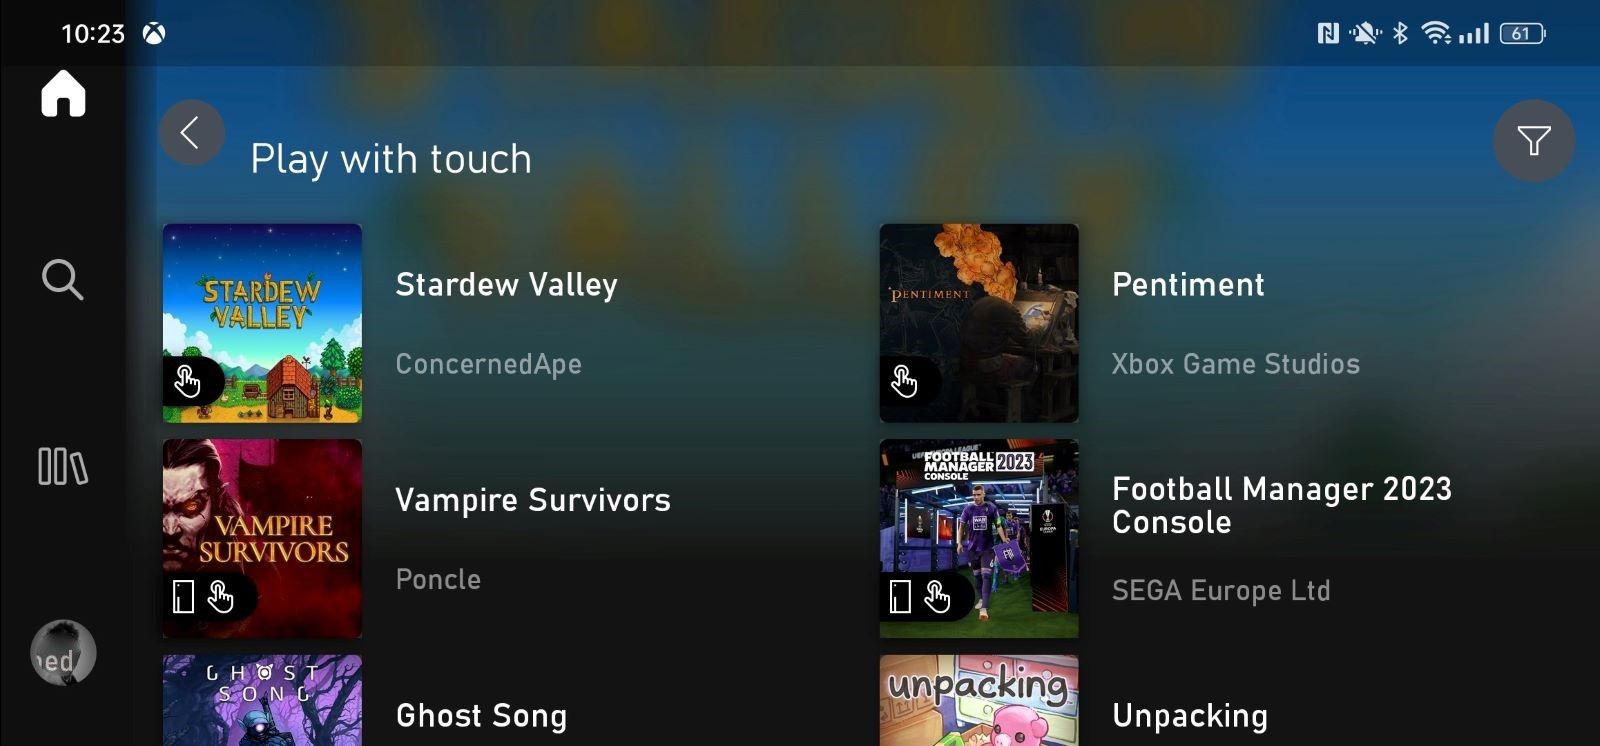 A screenshot of the available titles in the Xbox Game Pass Play With Touch category